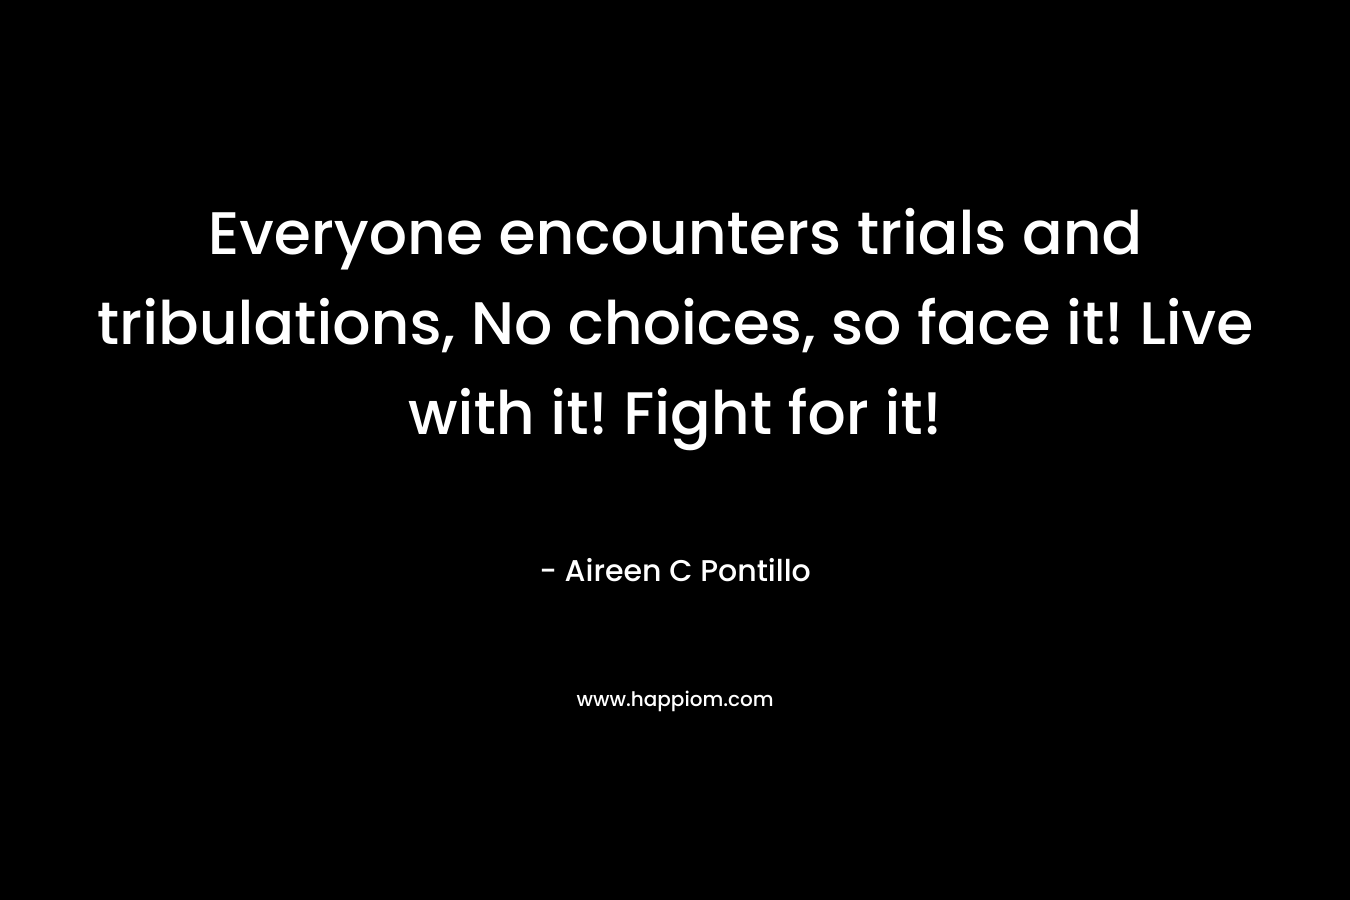 Everyone encounters trials and tribulations, No choices, so face it! Live with it! Fight for it!